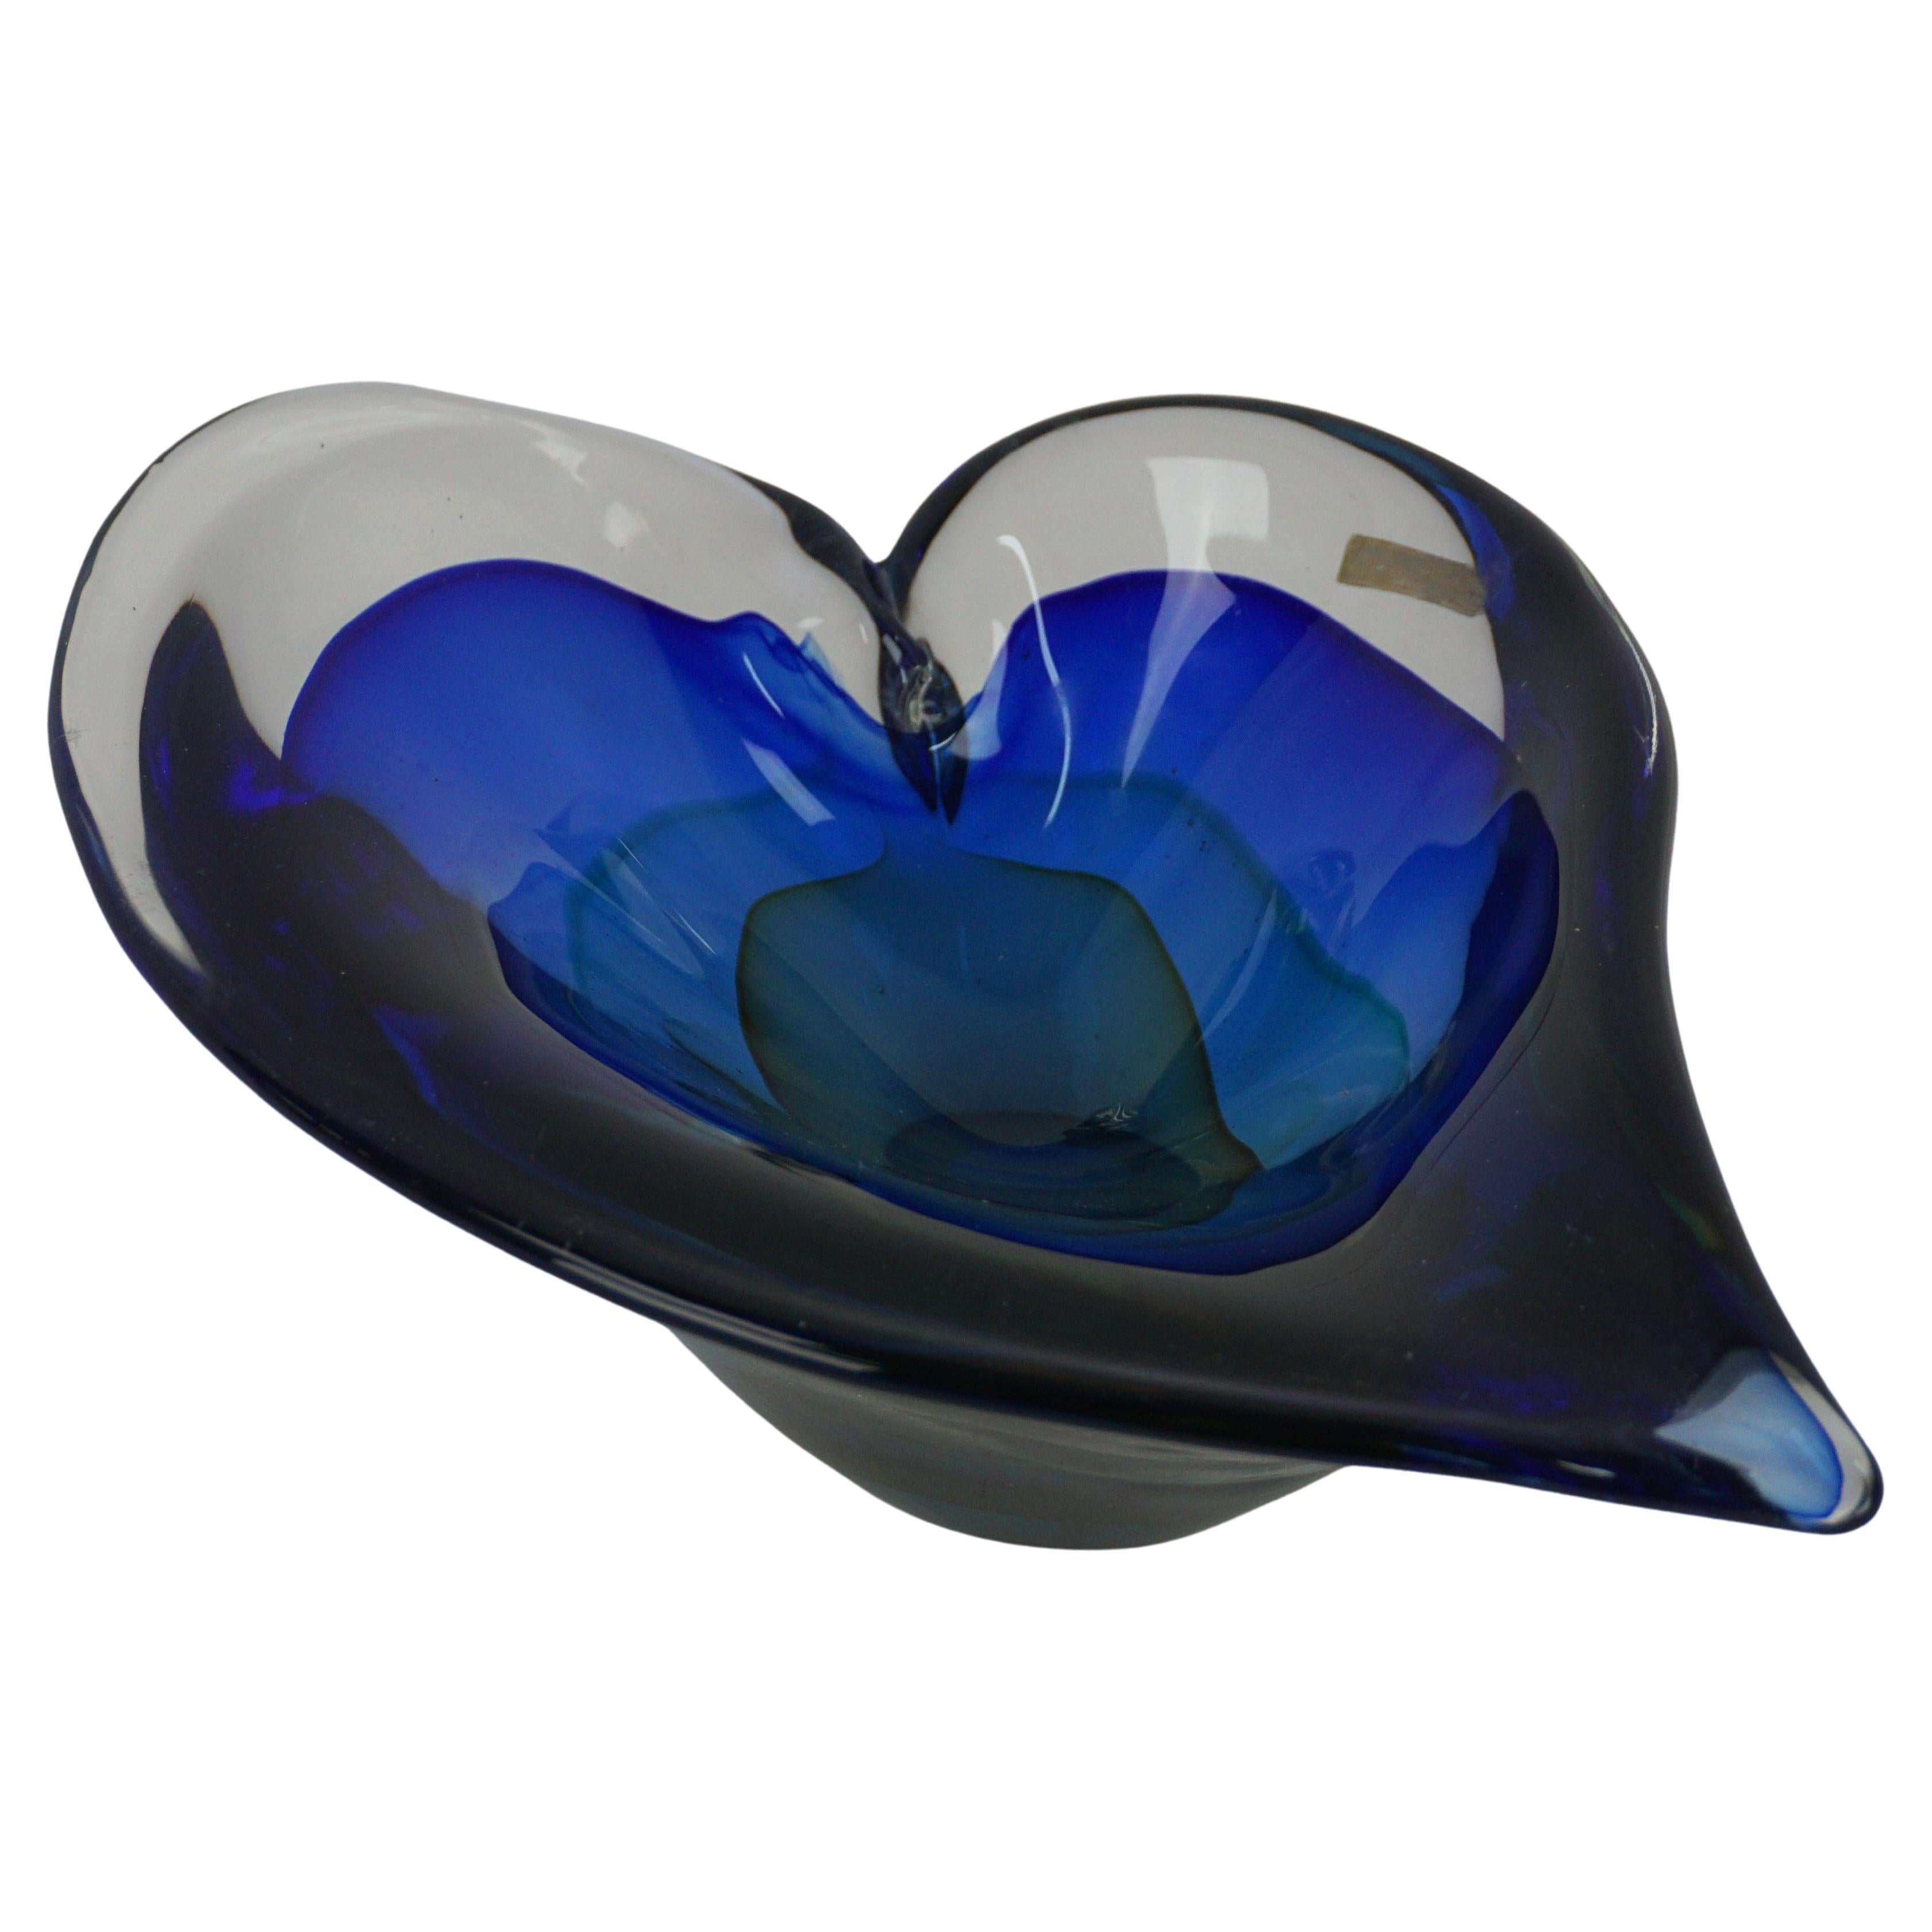 Gorgeous large sommerso (layered) heart bowl or centerpiece from Murano, Italy. Circa 2000. Unsigned. Clear, blue, cyan and ochre glass layers create dimension and interest. Label 